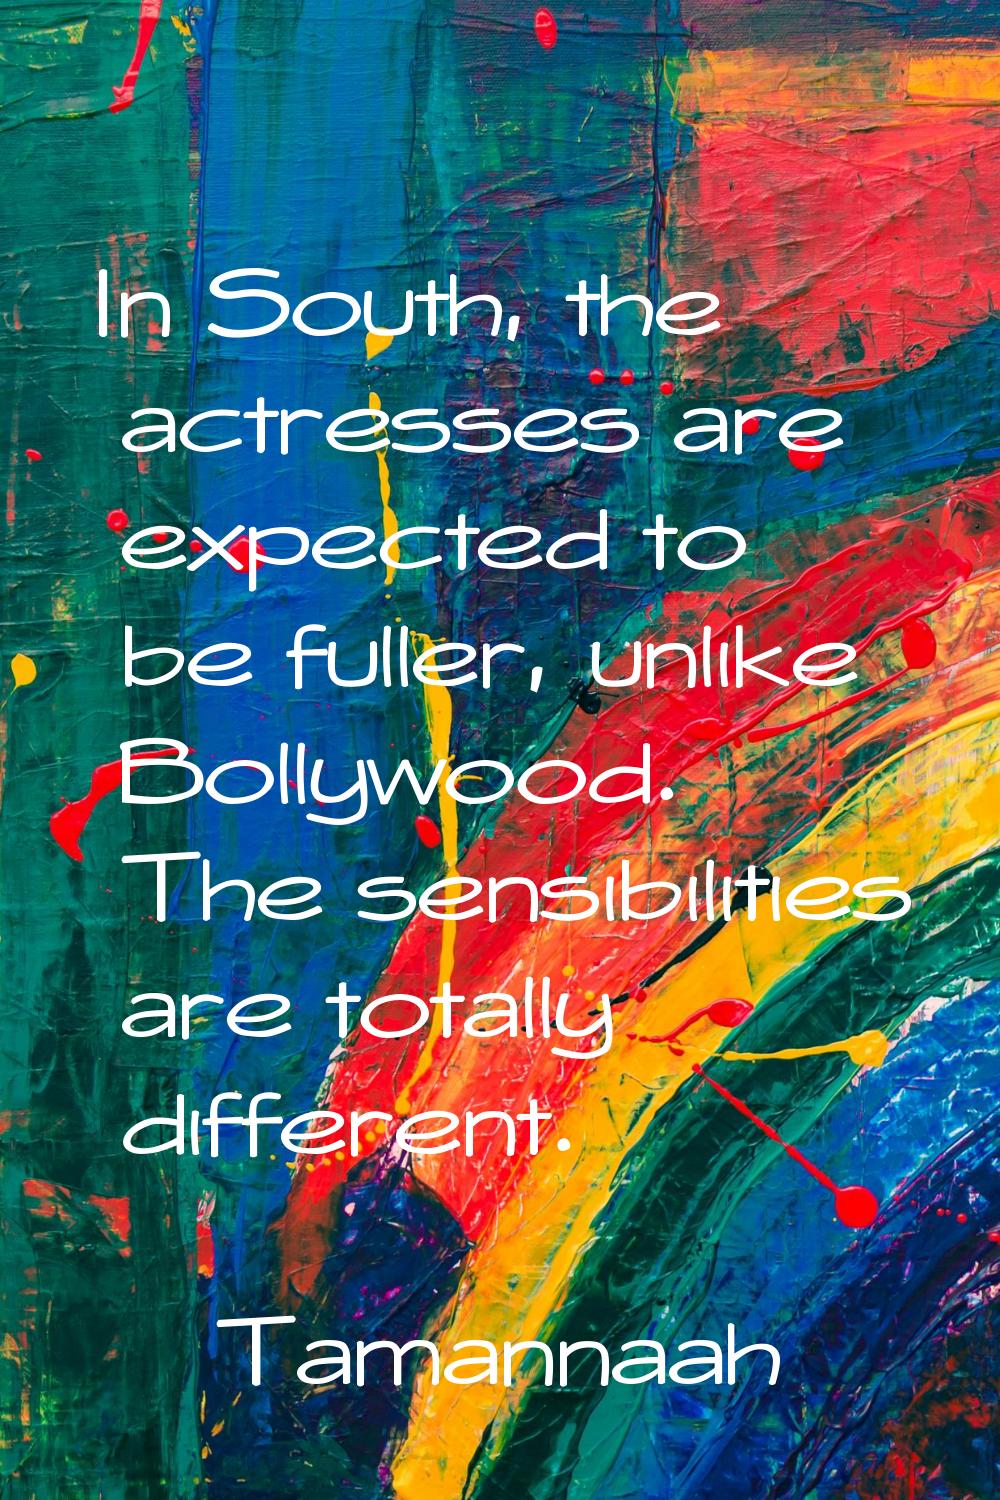 In South, the actresses are expected to be fuller, unlike Bollywood. The sensibilities are totally 